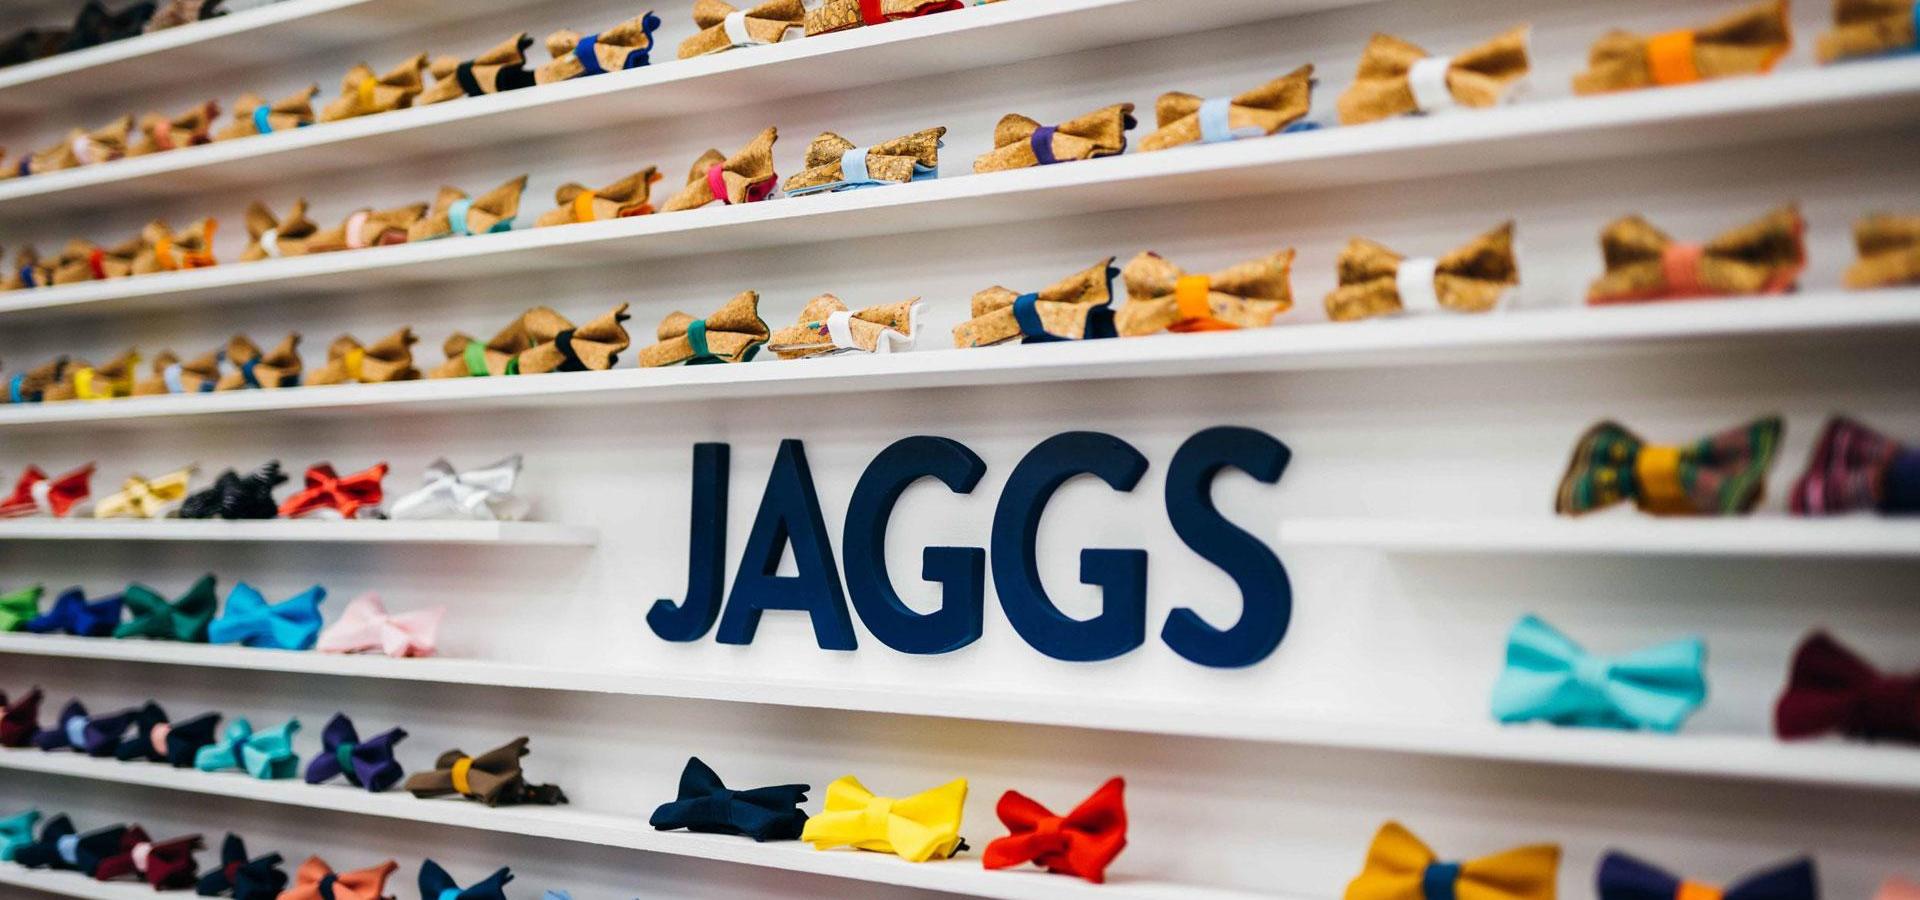 The JAAGS store magazine talks about us